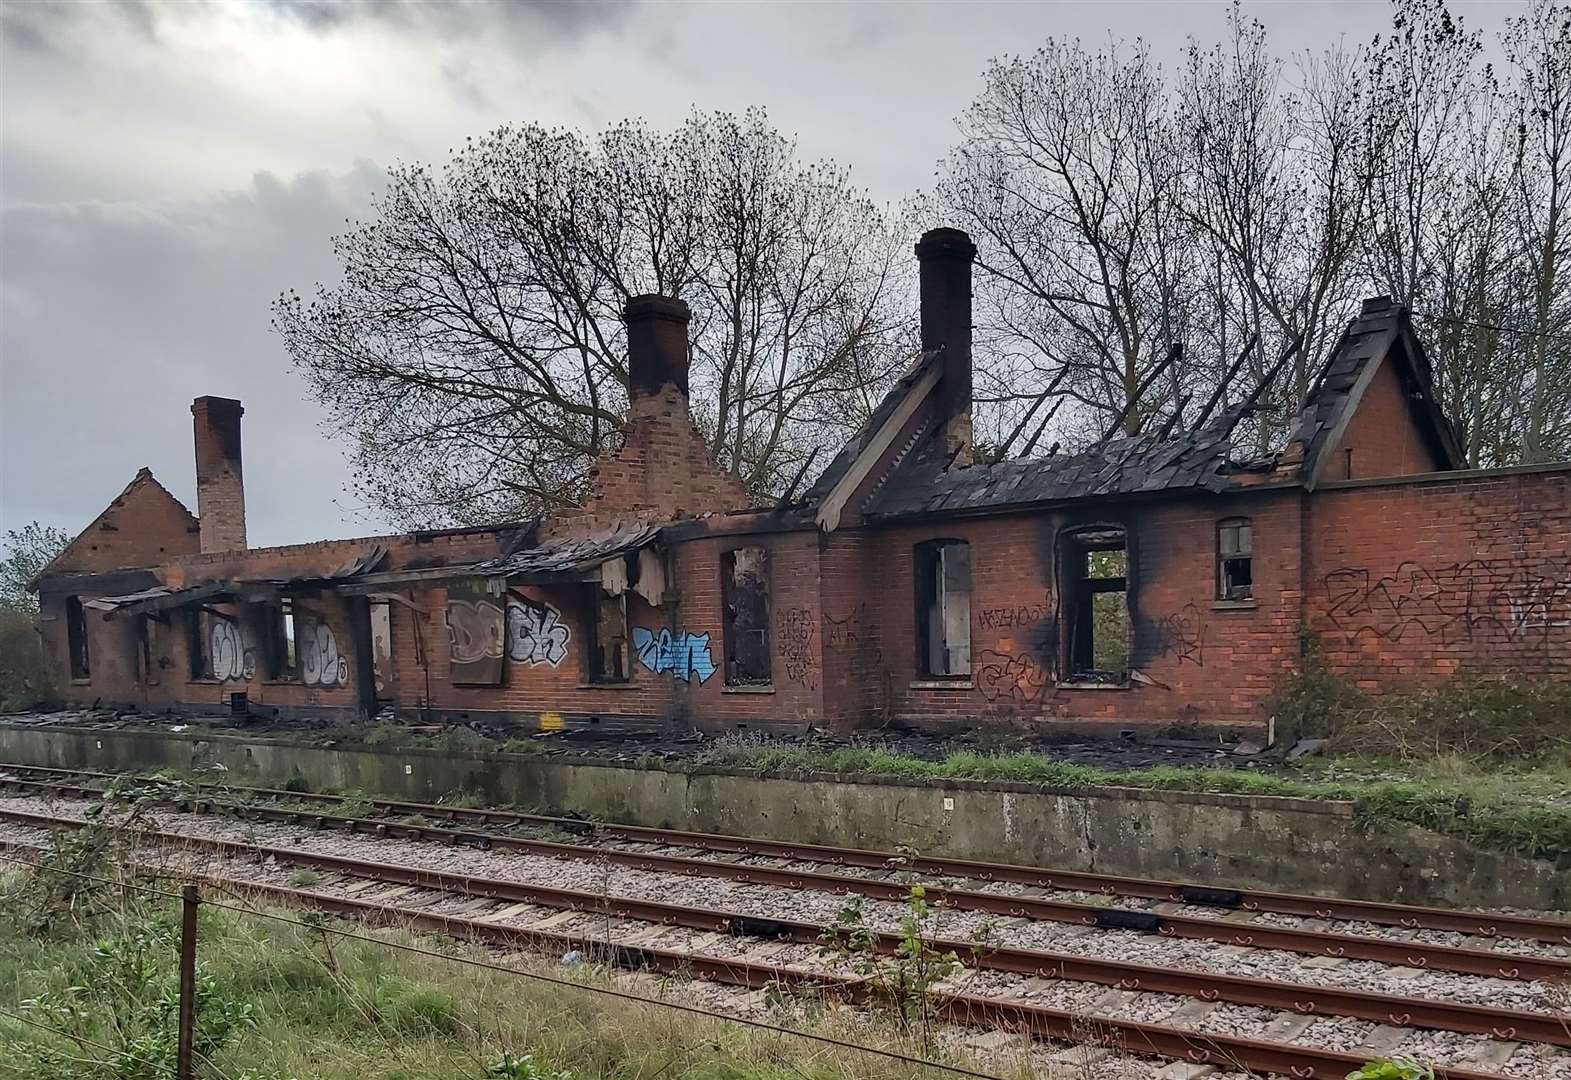 The aftermath of the fire at Lydd. Picture: Stephen Wilson